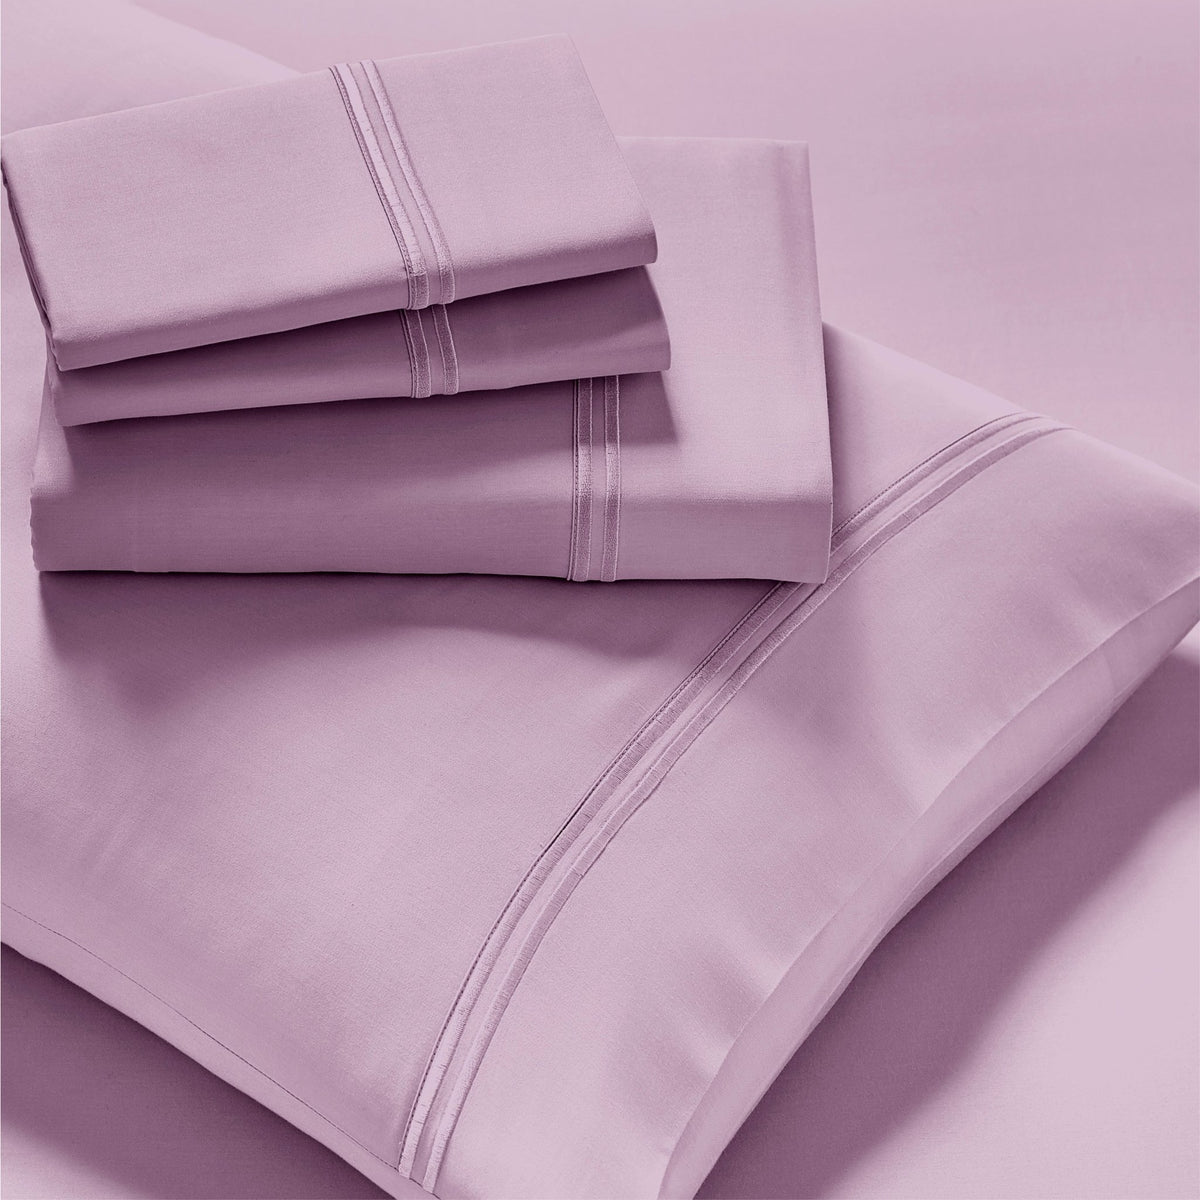 Image showcasing entire Lilac Refreshing TENCEL™ Lyocell Sheet Set. The image includes: a fitted sheet on the bed, a pillowcase on a pillow, a neatly folded flat sheet, and two neatly folded pillowcases.